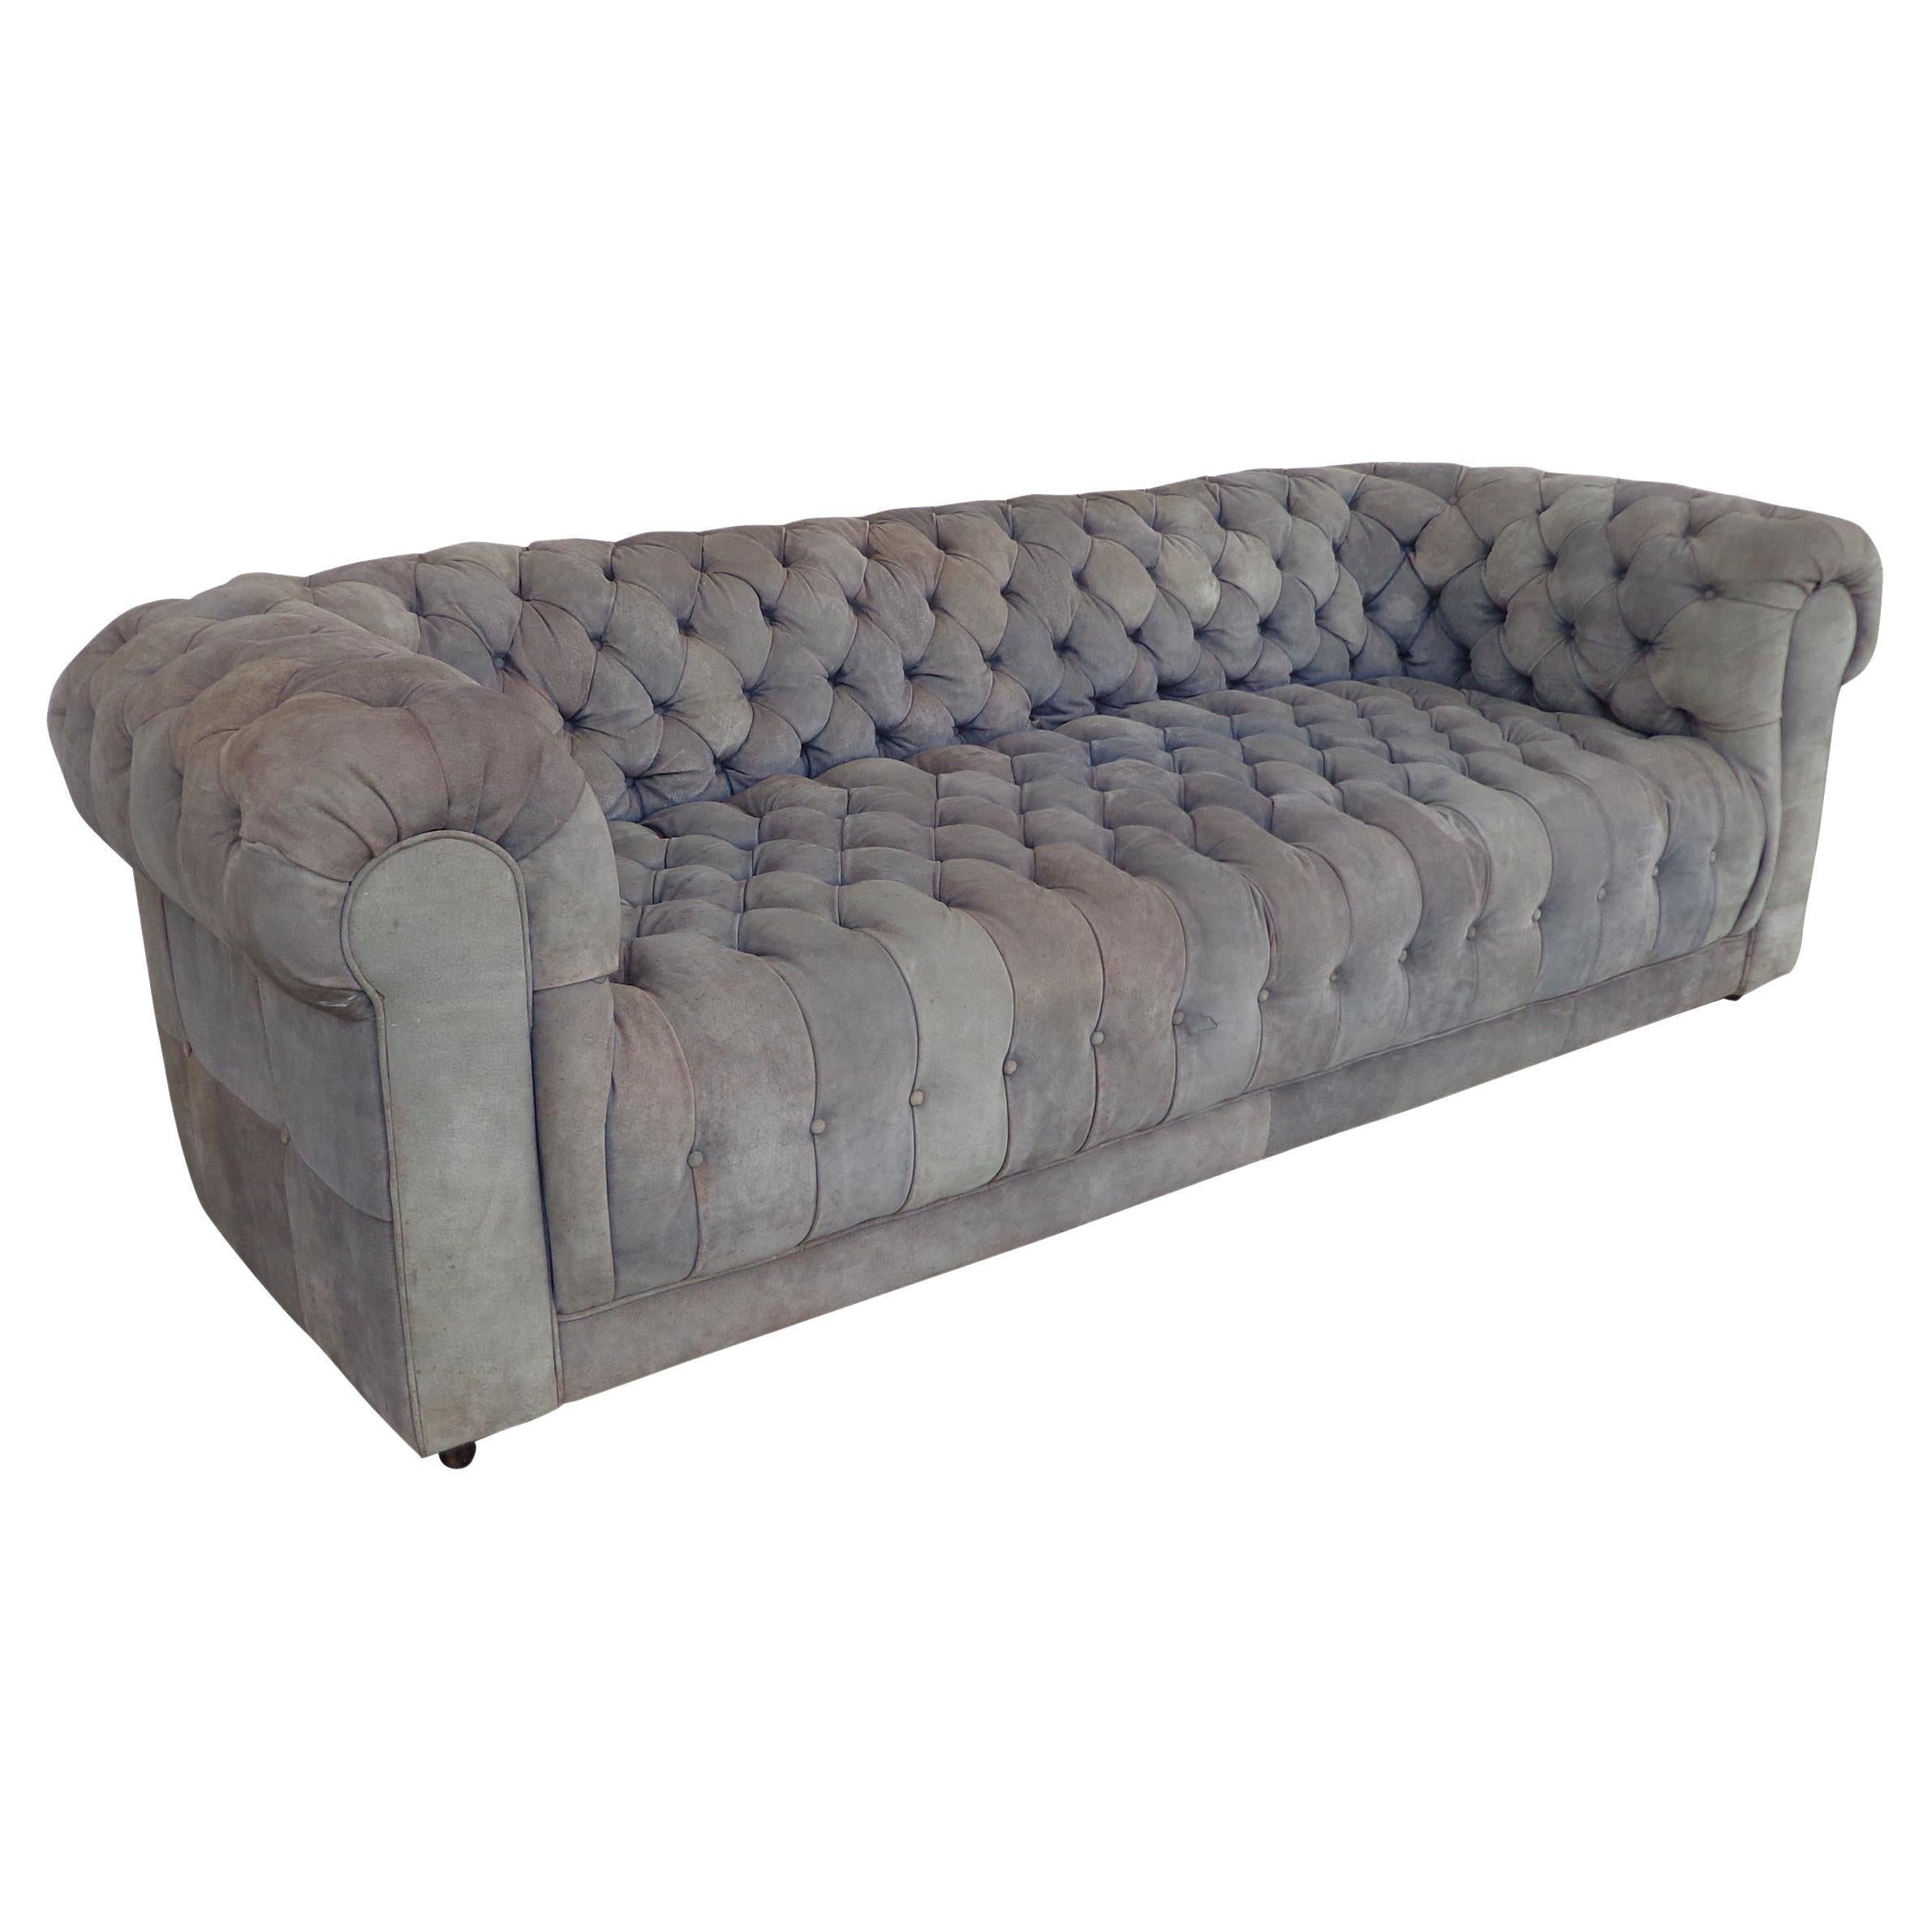 Vintage Edward Wormley Style Chesterfield Sofa For Sale at 1stDibs